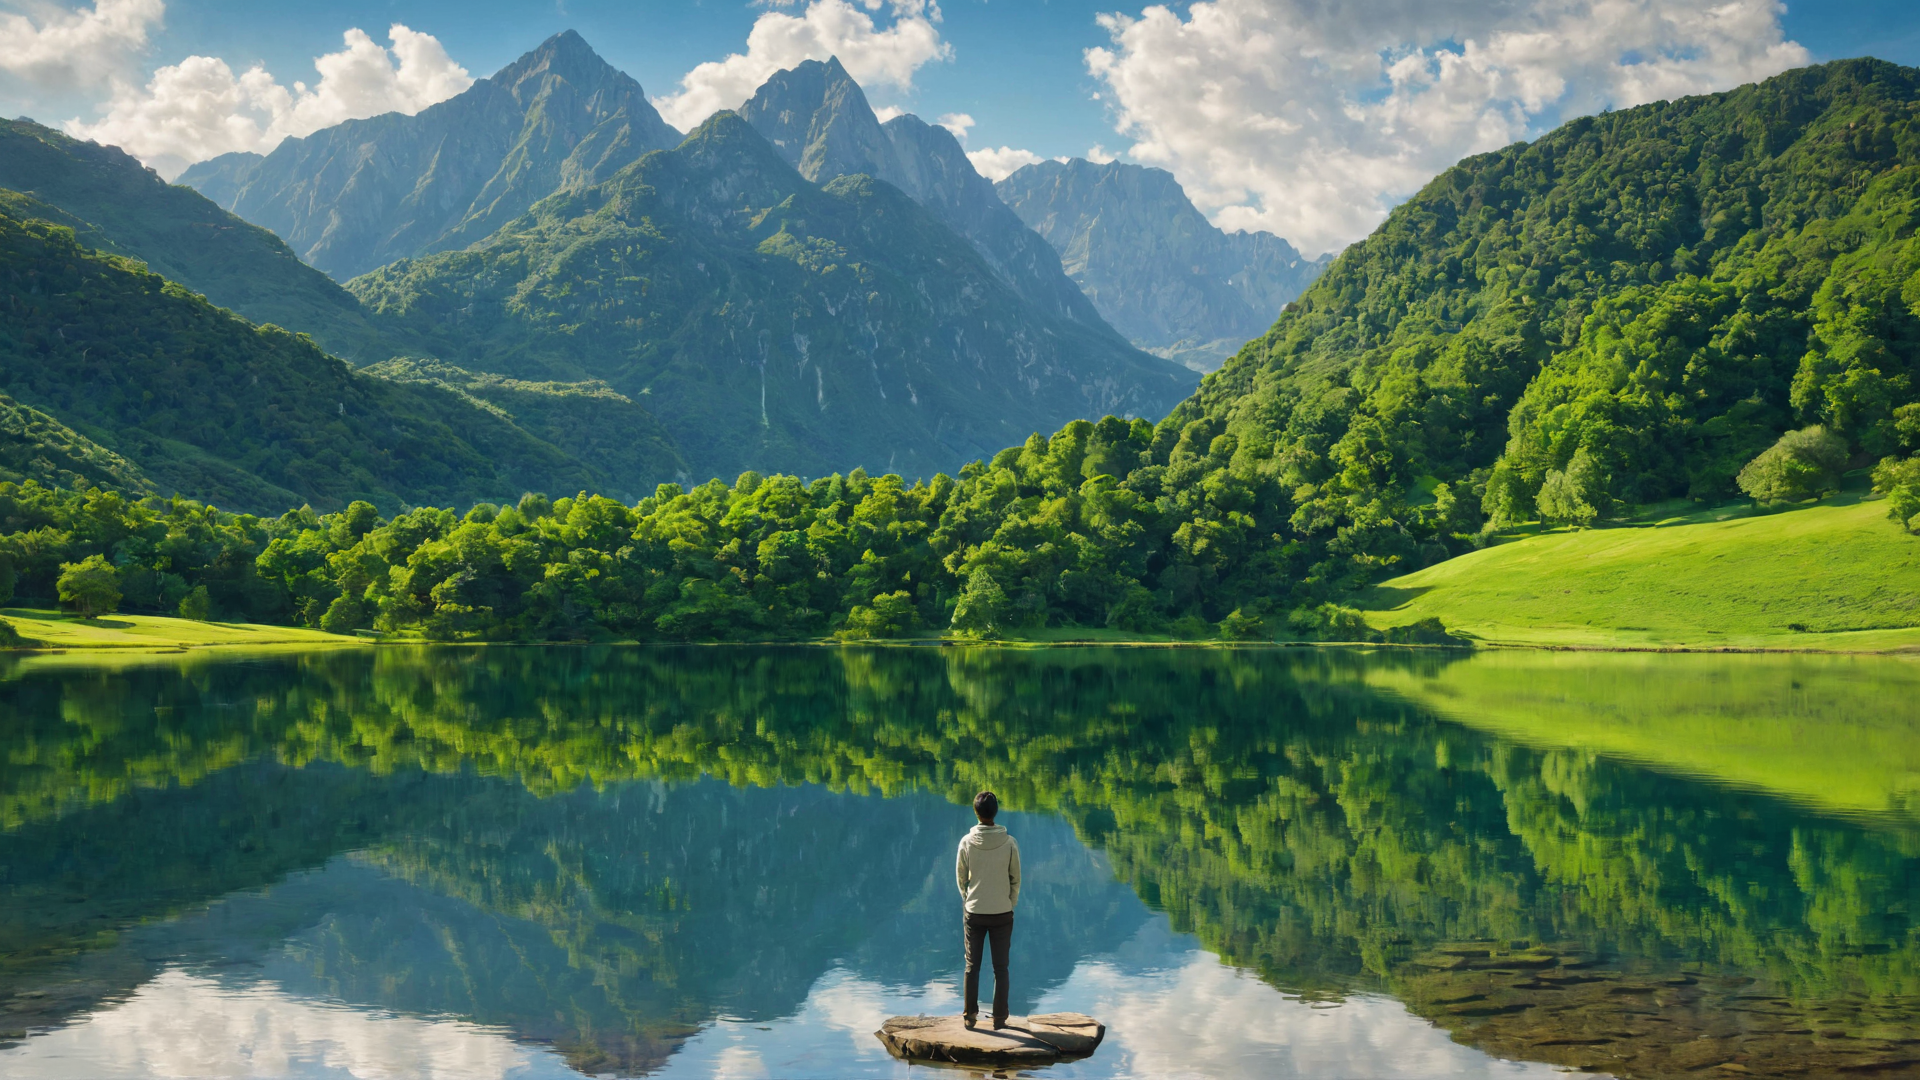 A peaceful and introspective scene showcasing an individual reflecting on their inner self by a calm lake, surrounded by nature's beauty, representing the search for internal fulfillment and the richness of self-exploration.